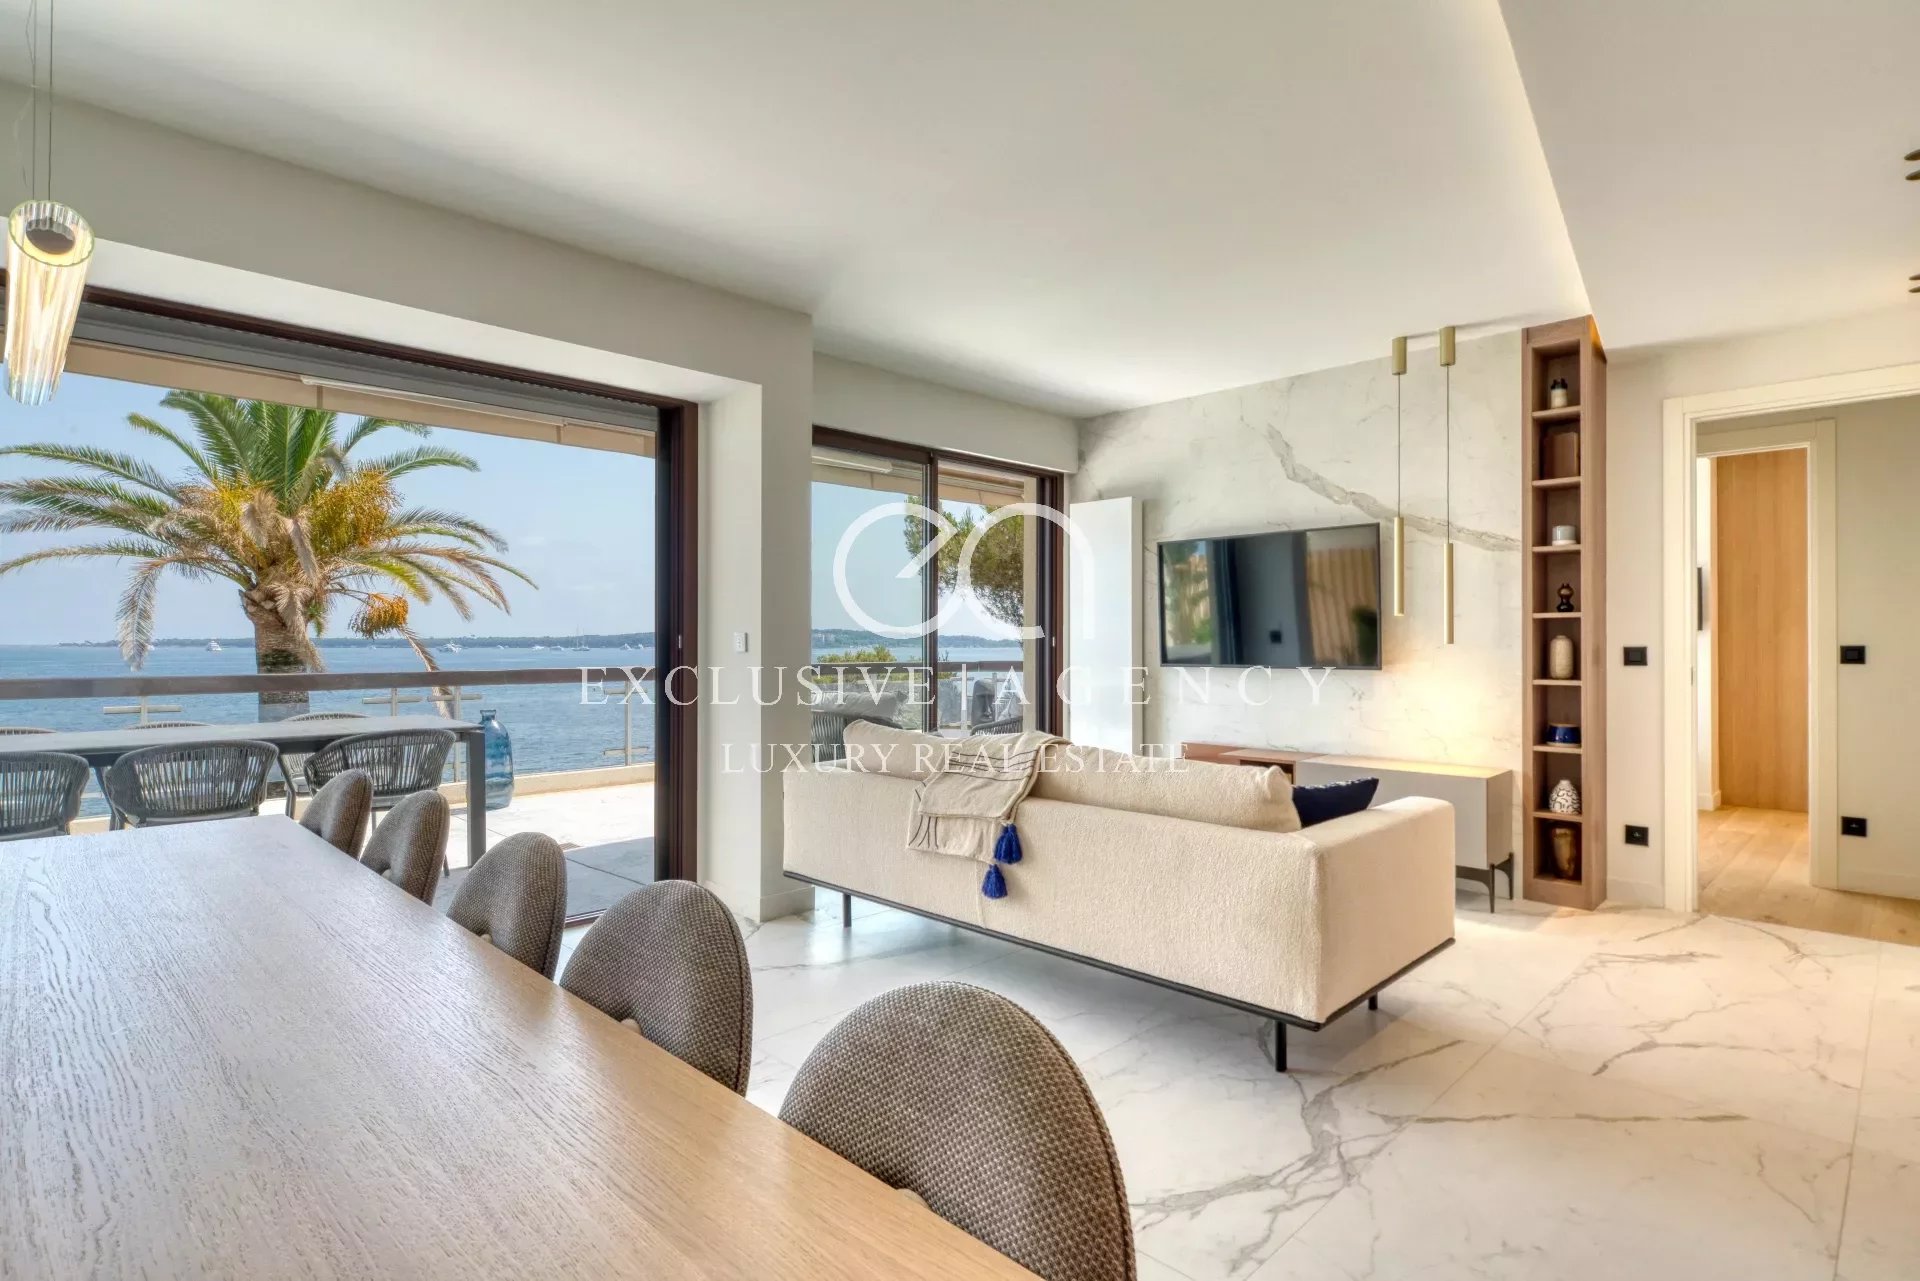 Cannes Palm Beach apartment 4 rooms 90m² feet in the water